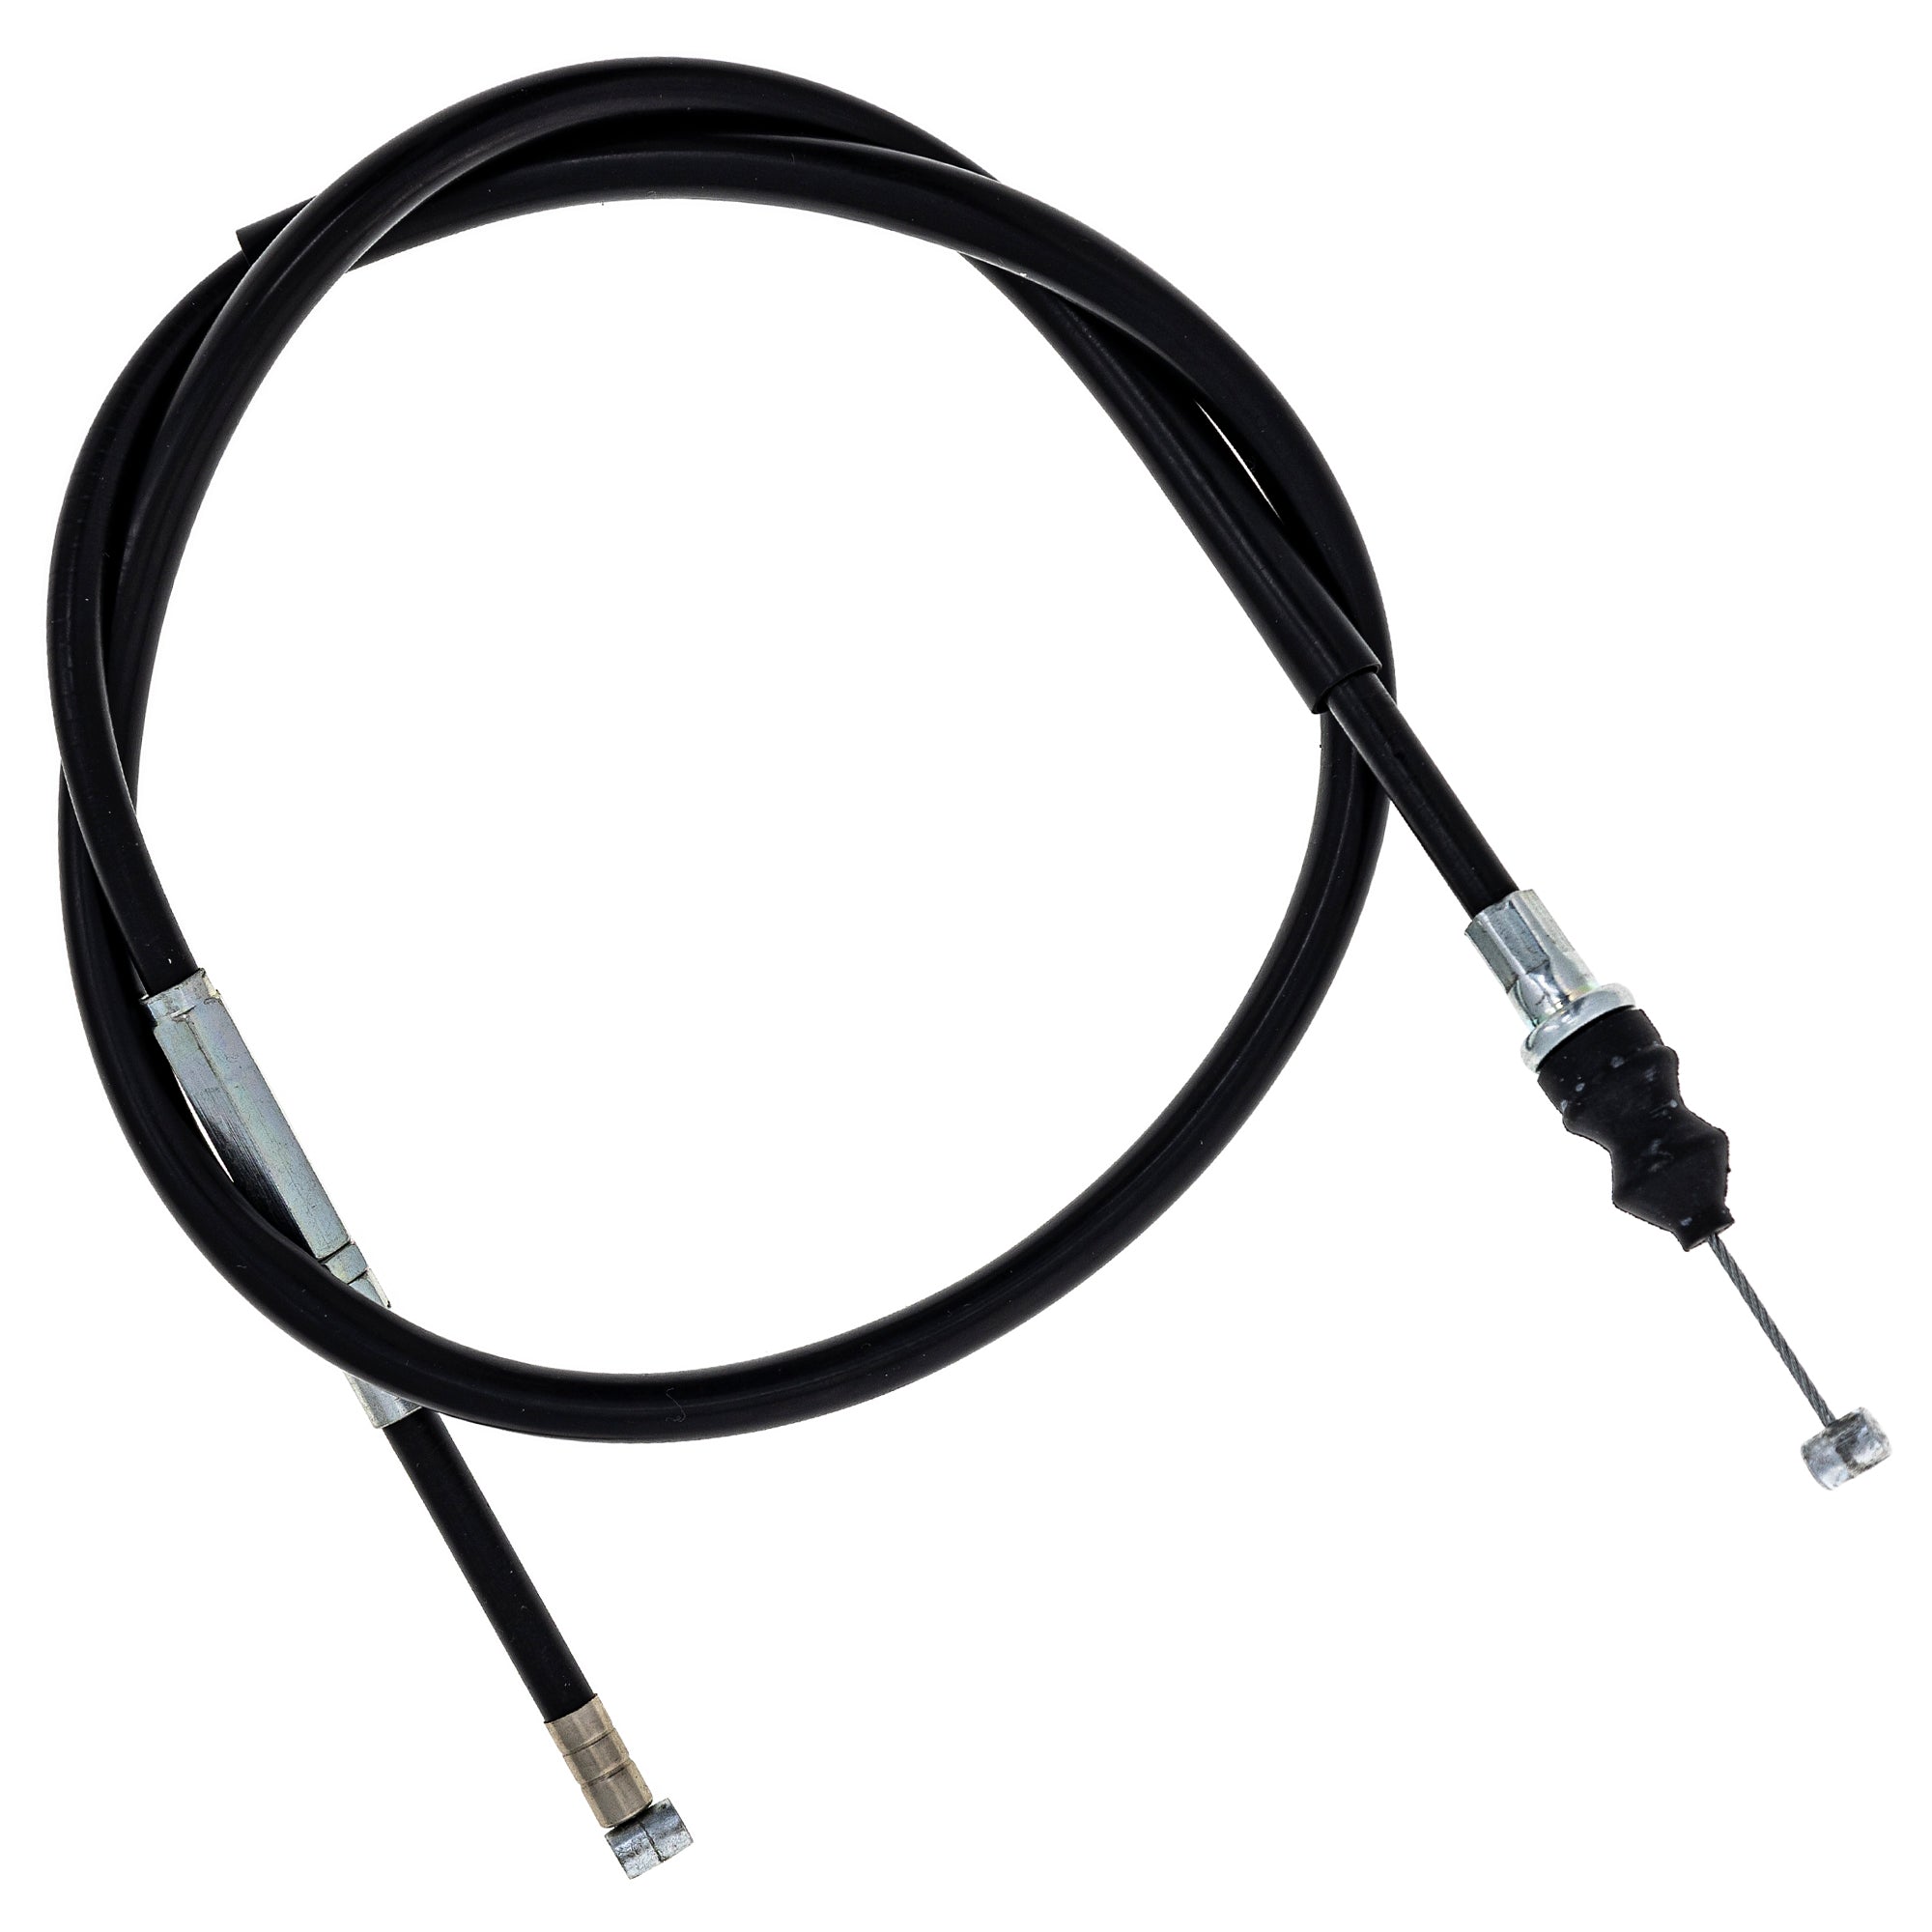 Decompression Cable for zOTHER YZ426F YZ400F YZ250F WR400F NICHE 519-CCB2551L